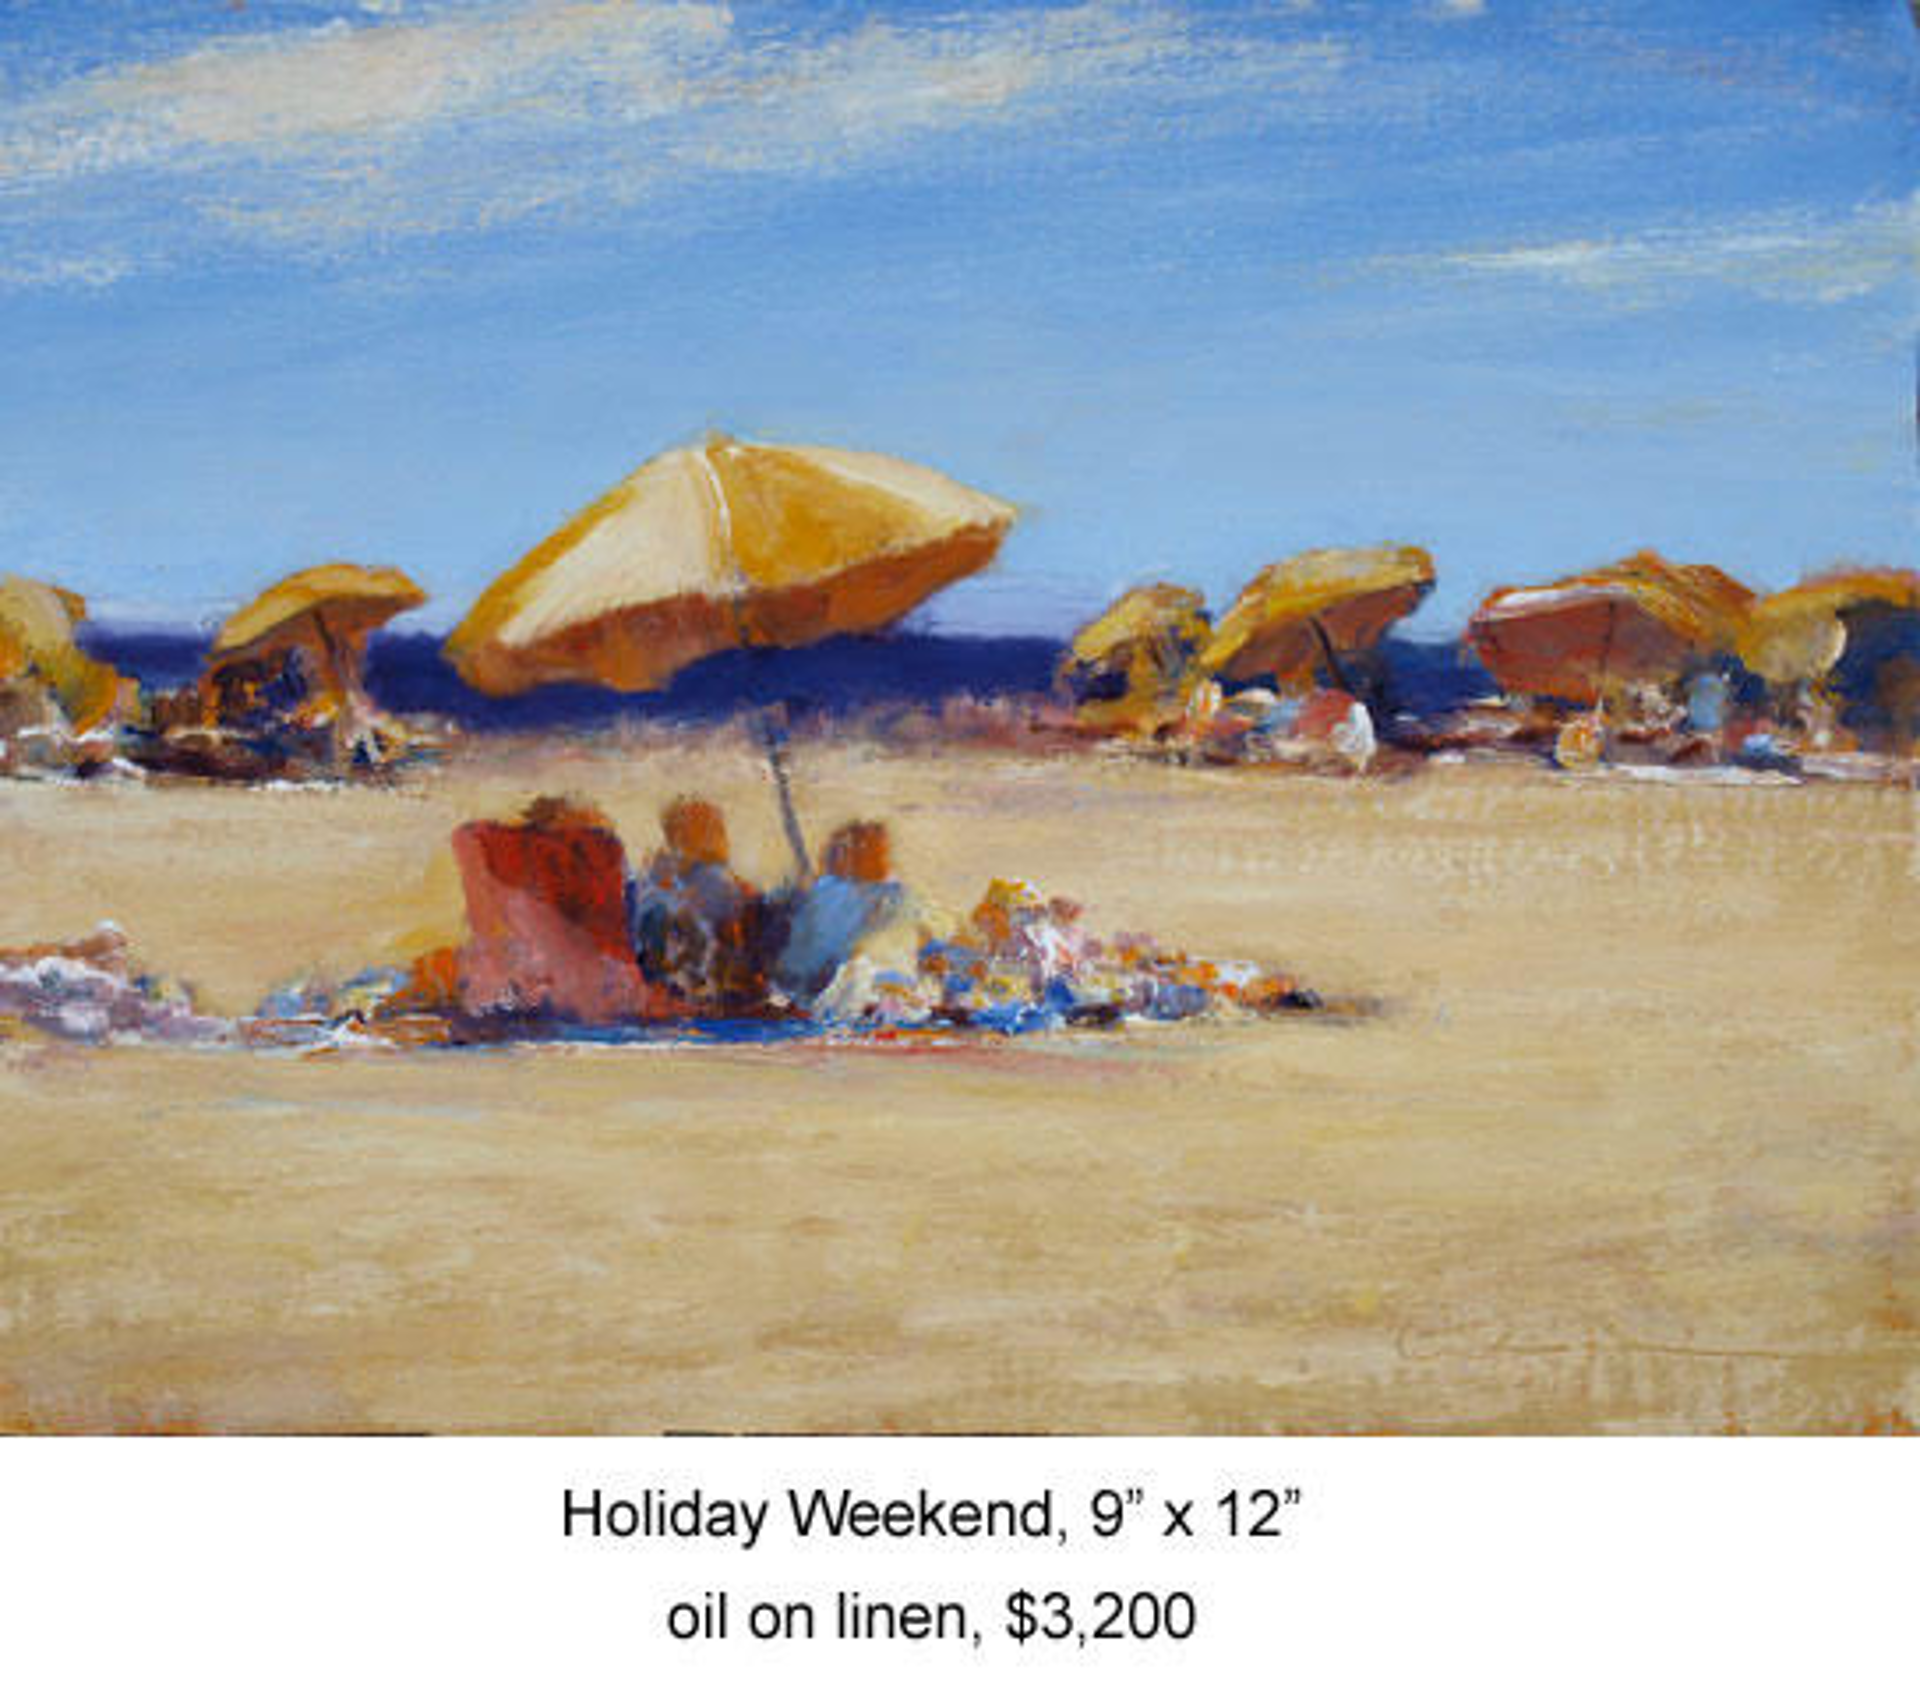 Holiday Weekend by William Berra